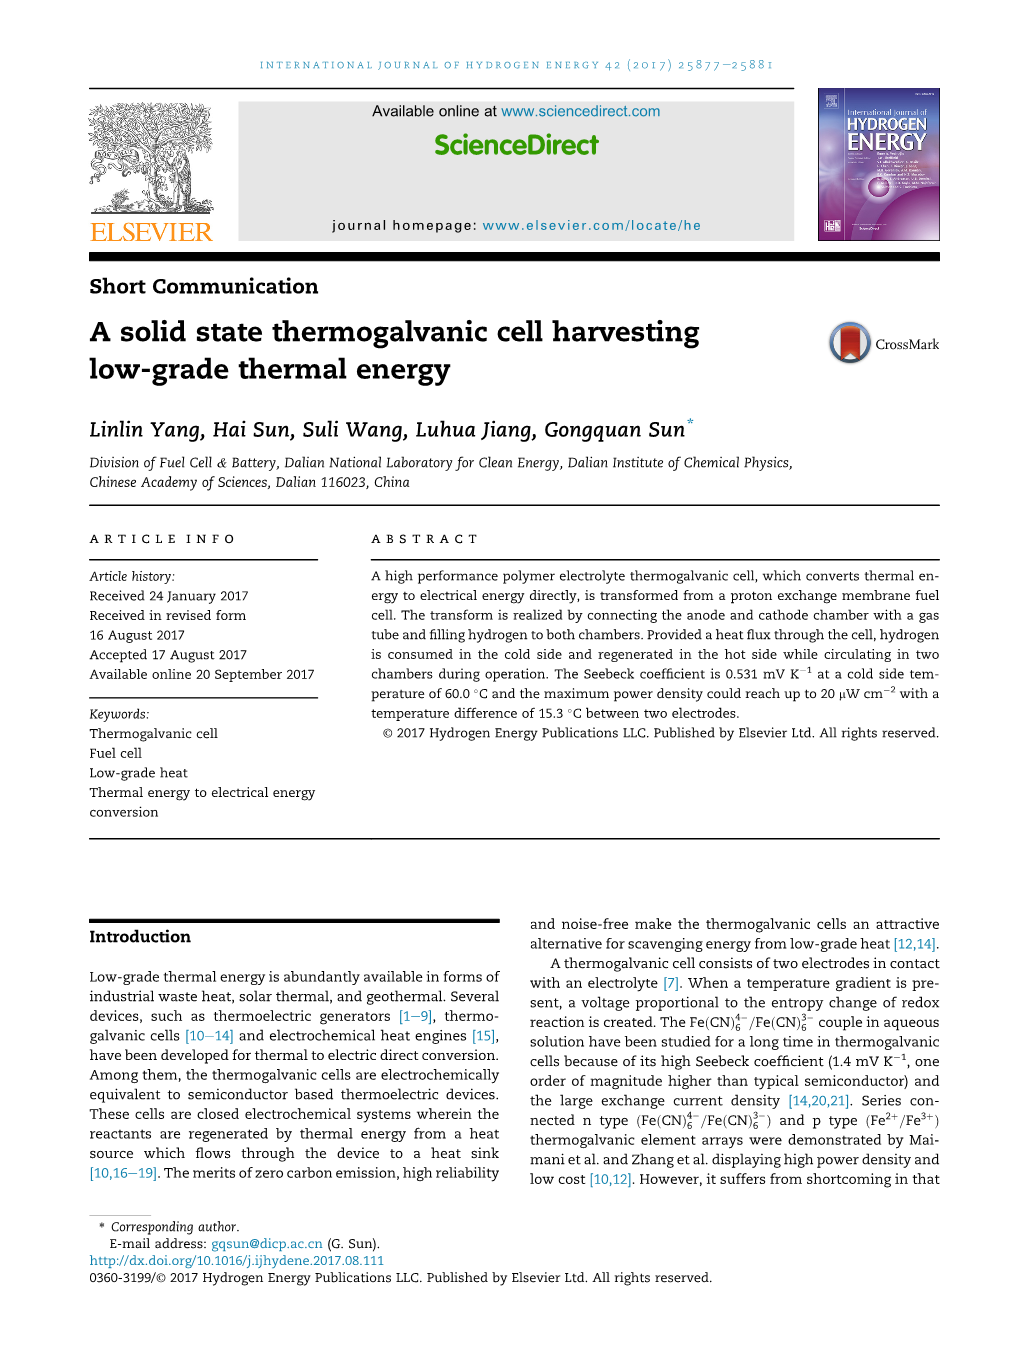 A Solid State Thermogalvanic Cell Harvesting Low-Grade Thermal Energy